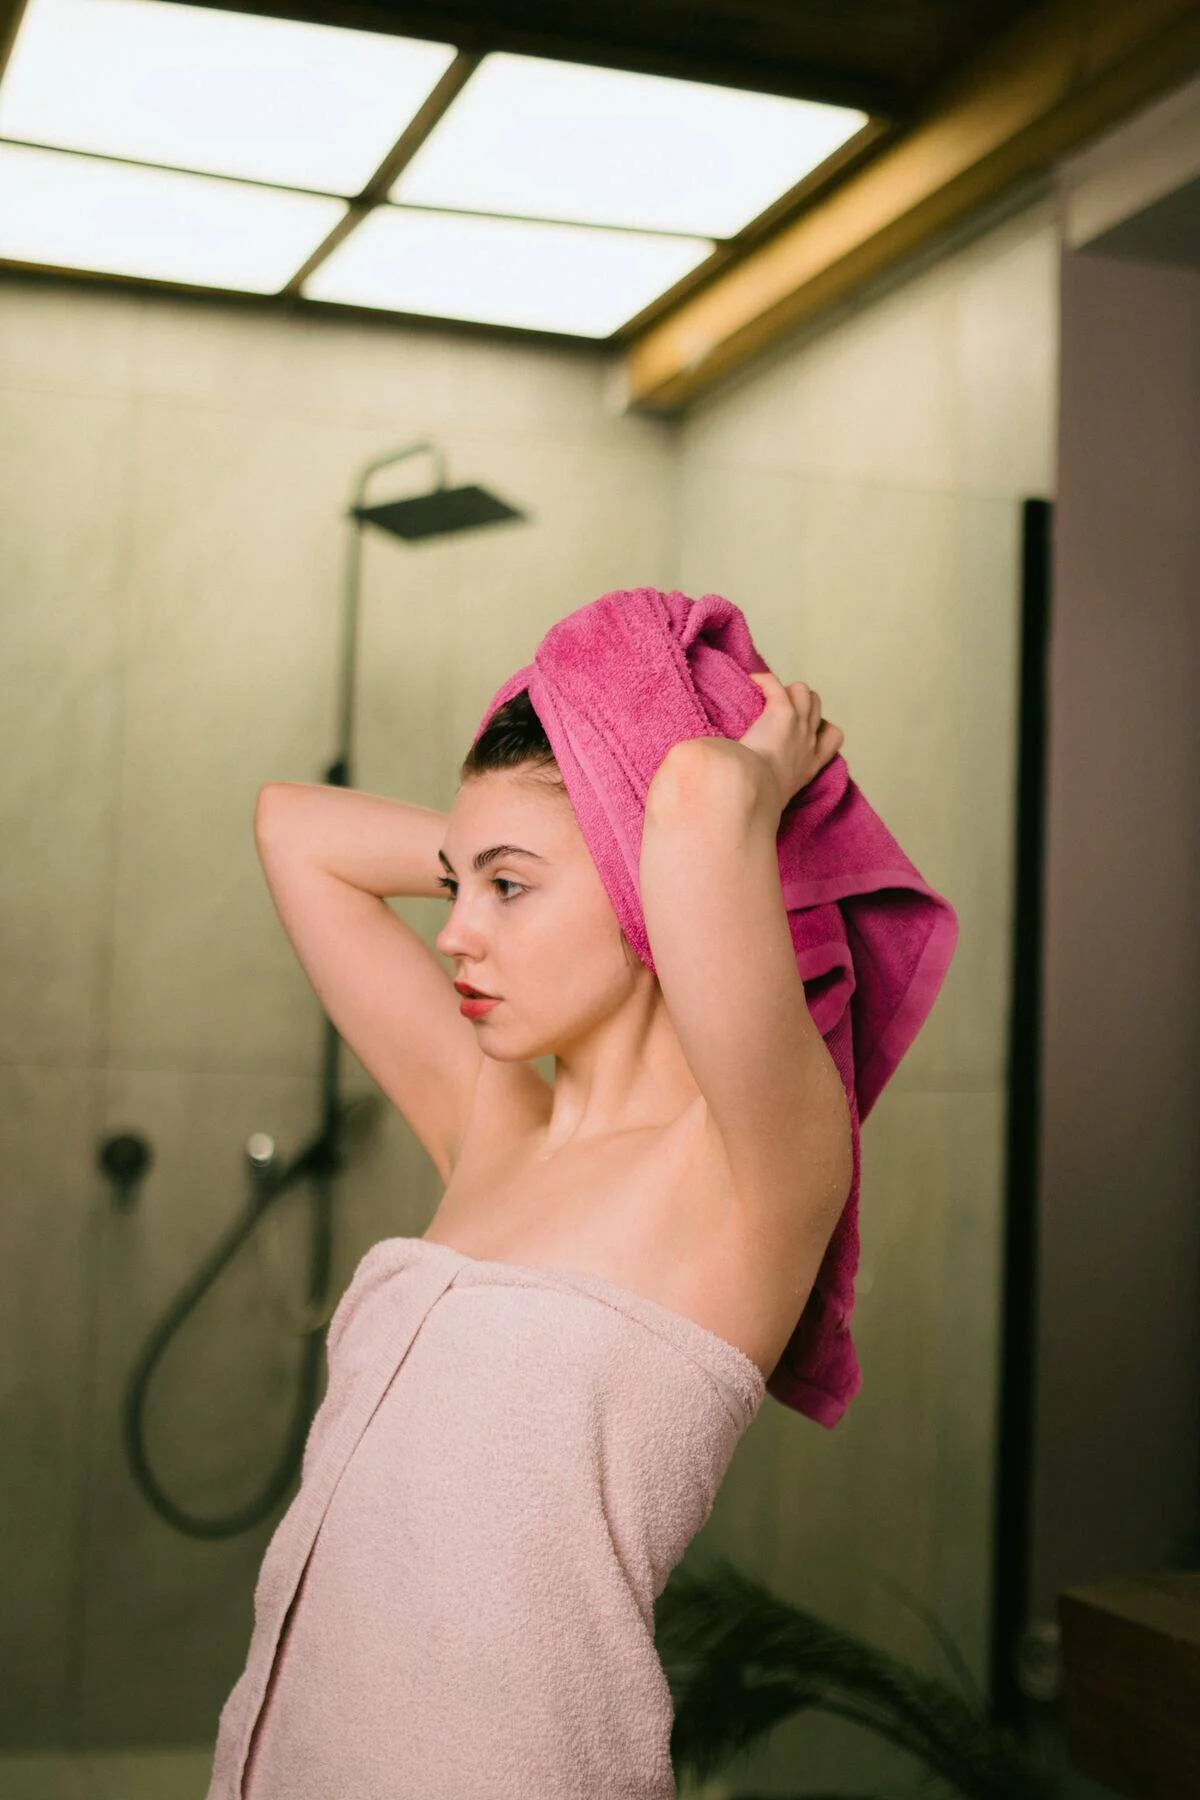 <p>It is important for people to be gentle while towel-drying their hair, as rough towel-drying can cause damage to the hair cuticles, leading to frizz, breakage, and split ends. Hair is at its weakest when wet, so vigorous towel-drying can result in stretching and weakening of the hair shaft, making it more prone to damage. </p> <p>Being gentle while towel-drying helps to minimize friction and reduce the risk of hair breakage, ultimately contributing to the overall health and appearance of the hair. Opting for a soft, microfiber towel or gently patting the hair dry can help maintain the integrity of the hair and prevent unnecessary damage.</p>